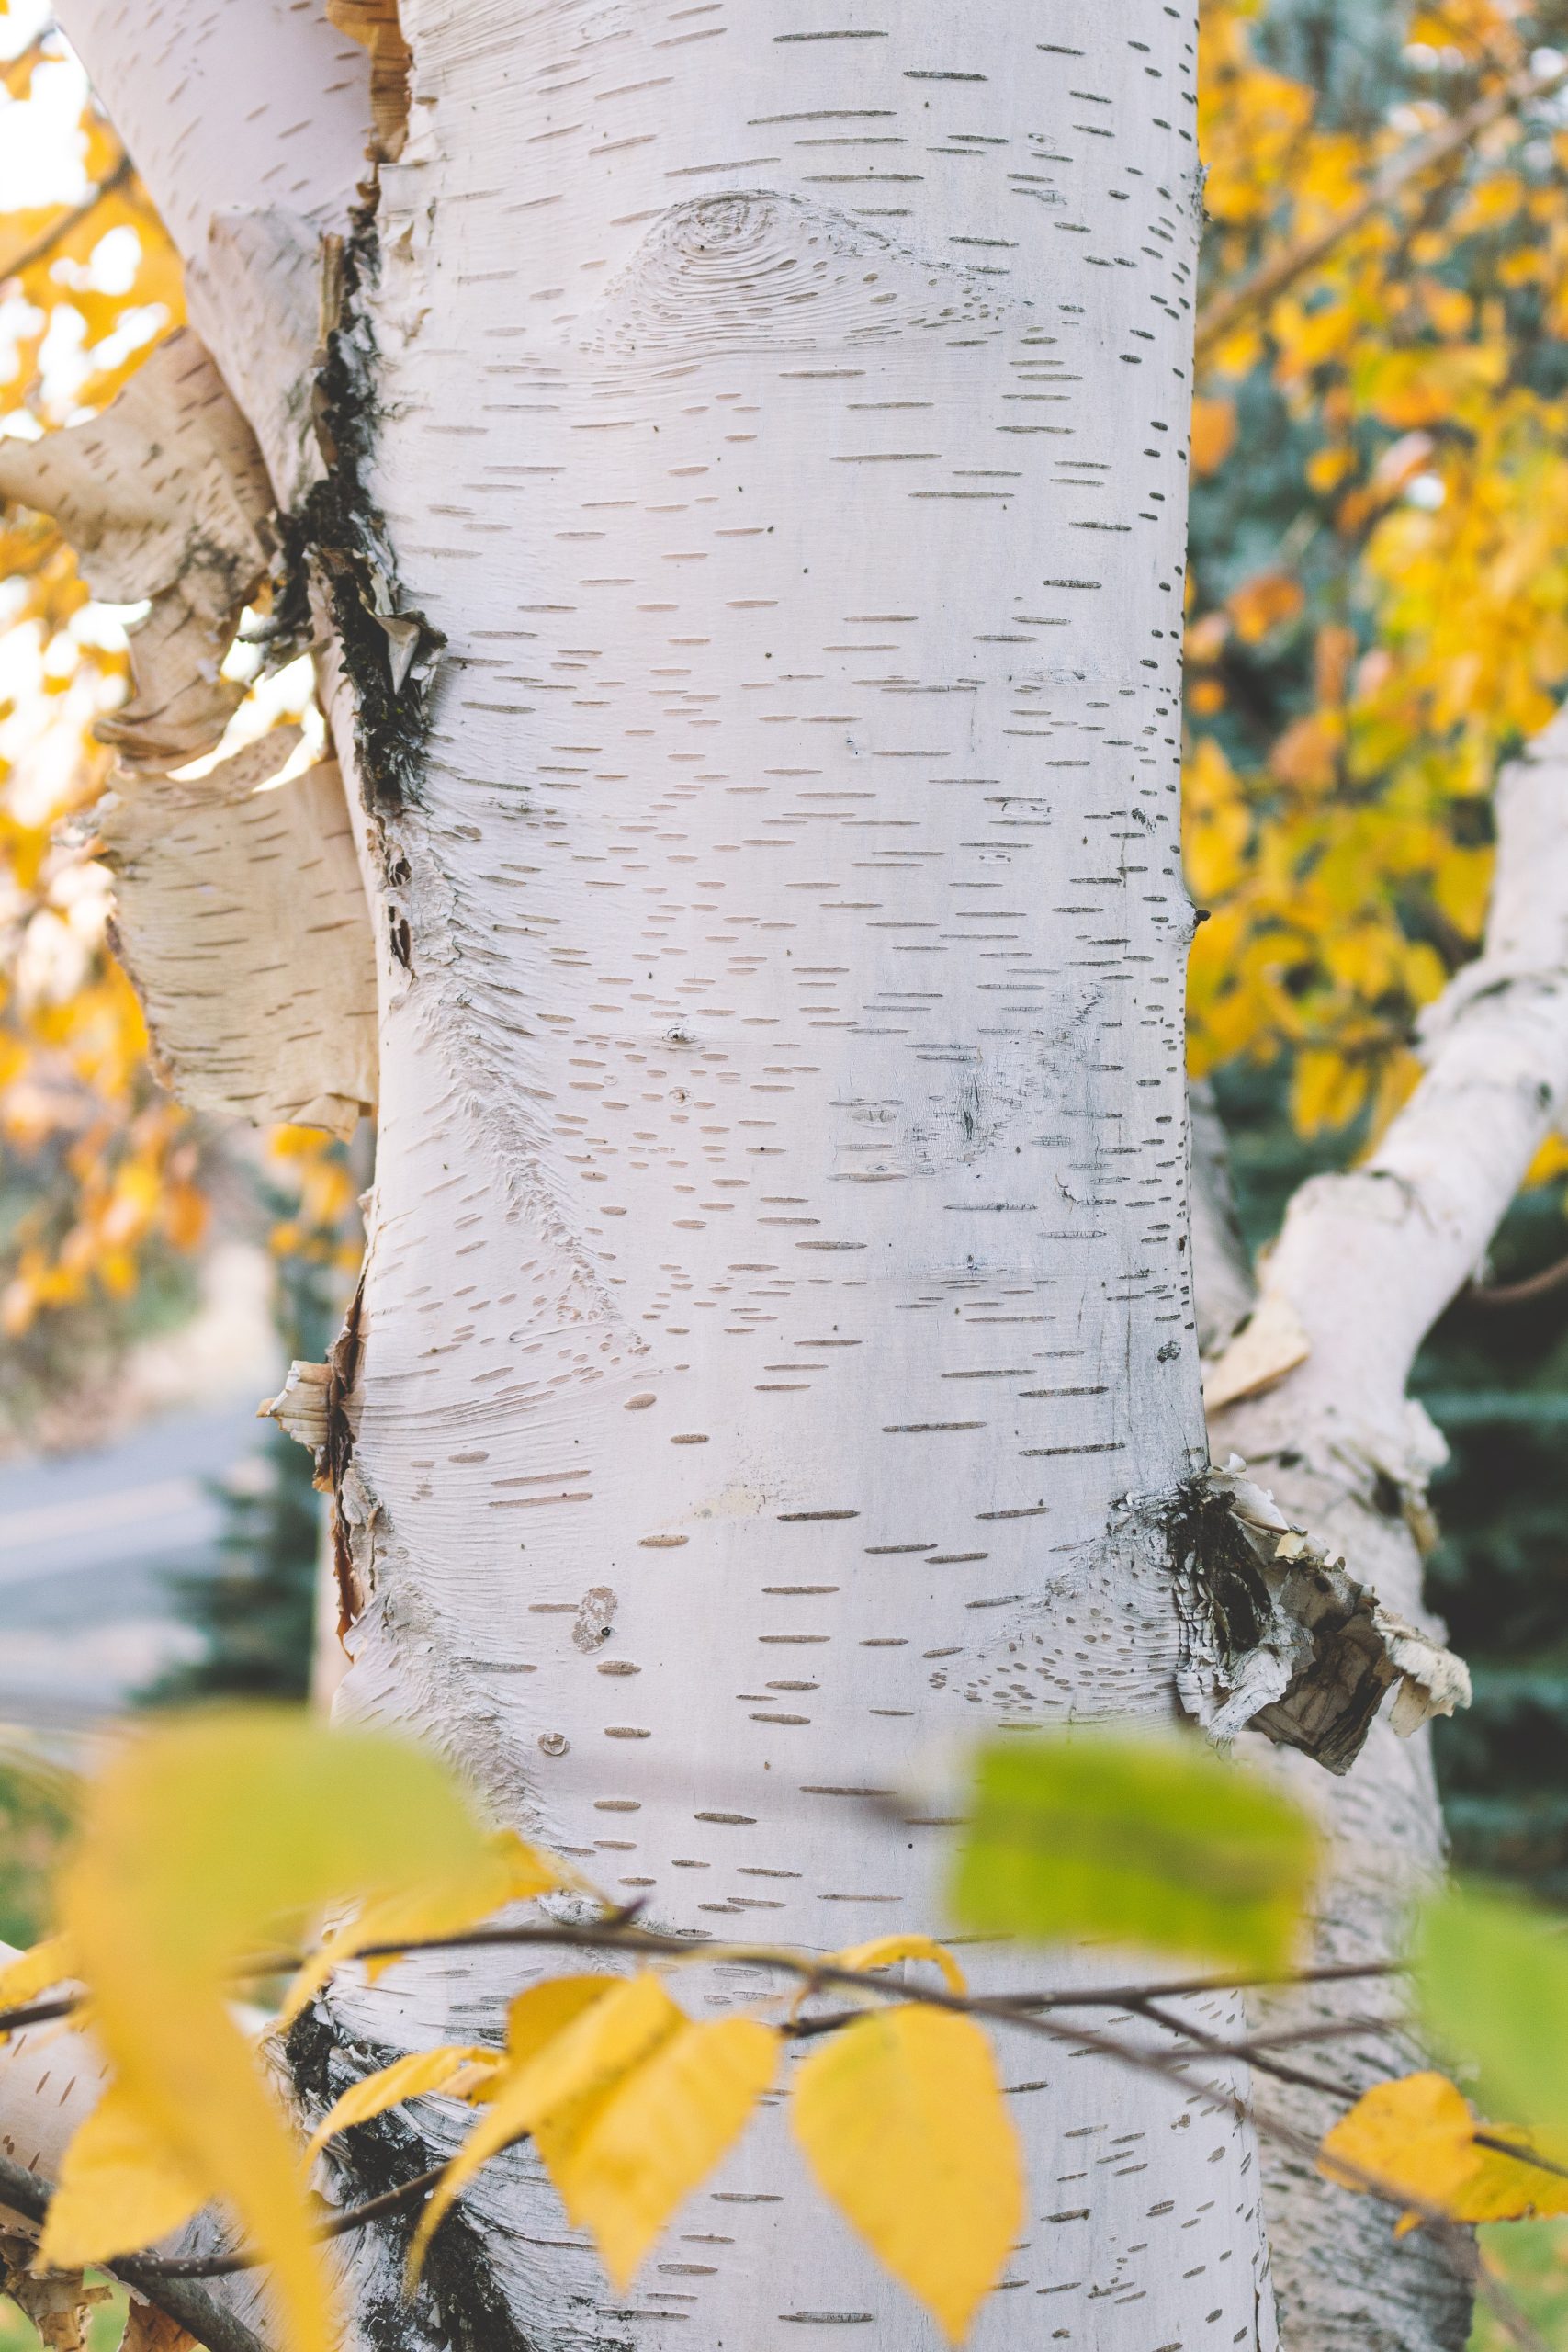 A birch tree trunk that has white bark with small black horizontal lines throughout is pictured.